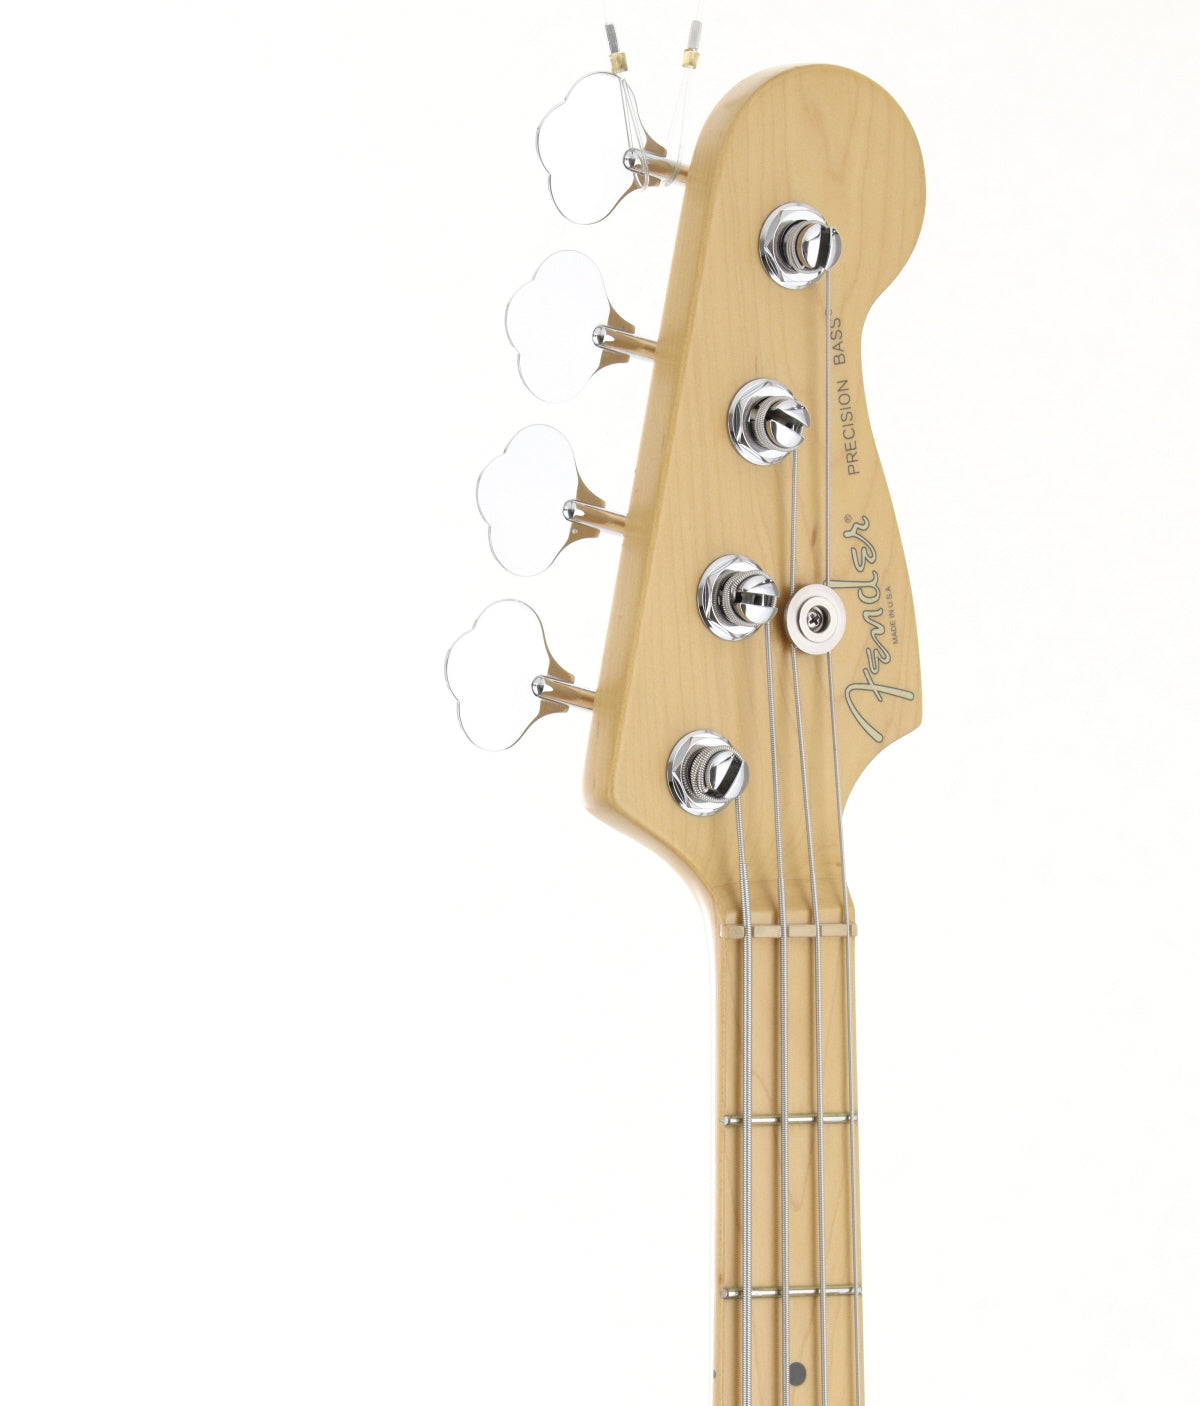 [SN N8330385] USED FENDER USA / American Standard Precision Bass Natural [03]